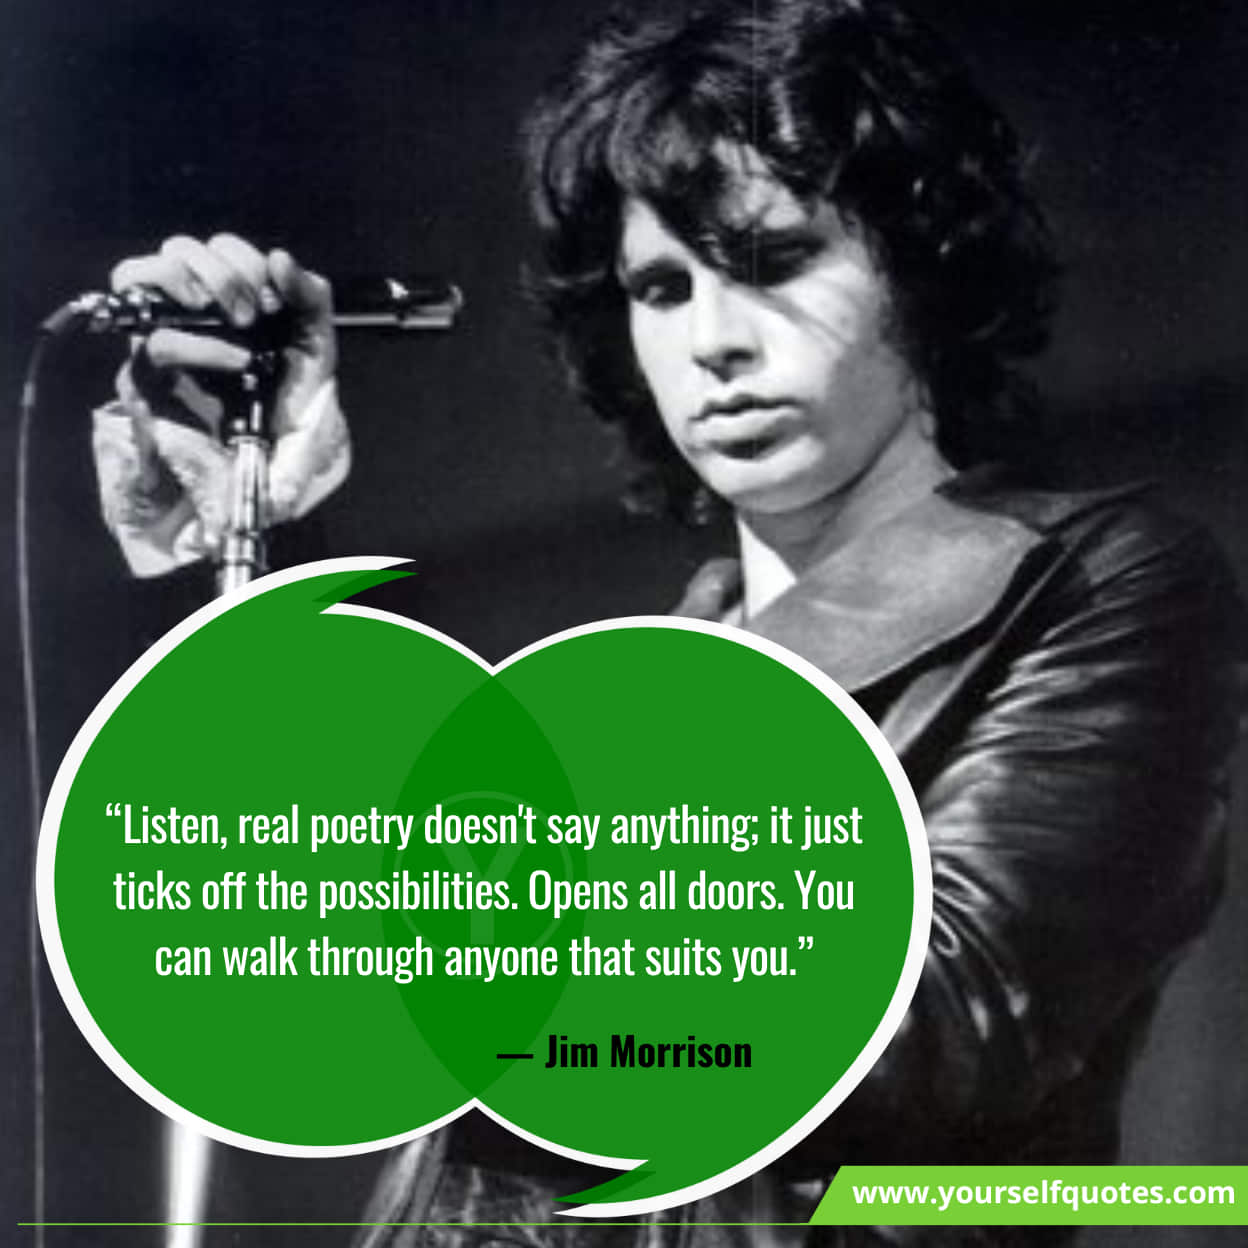 Jim Morrison's exploration of life and death